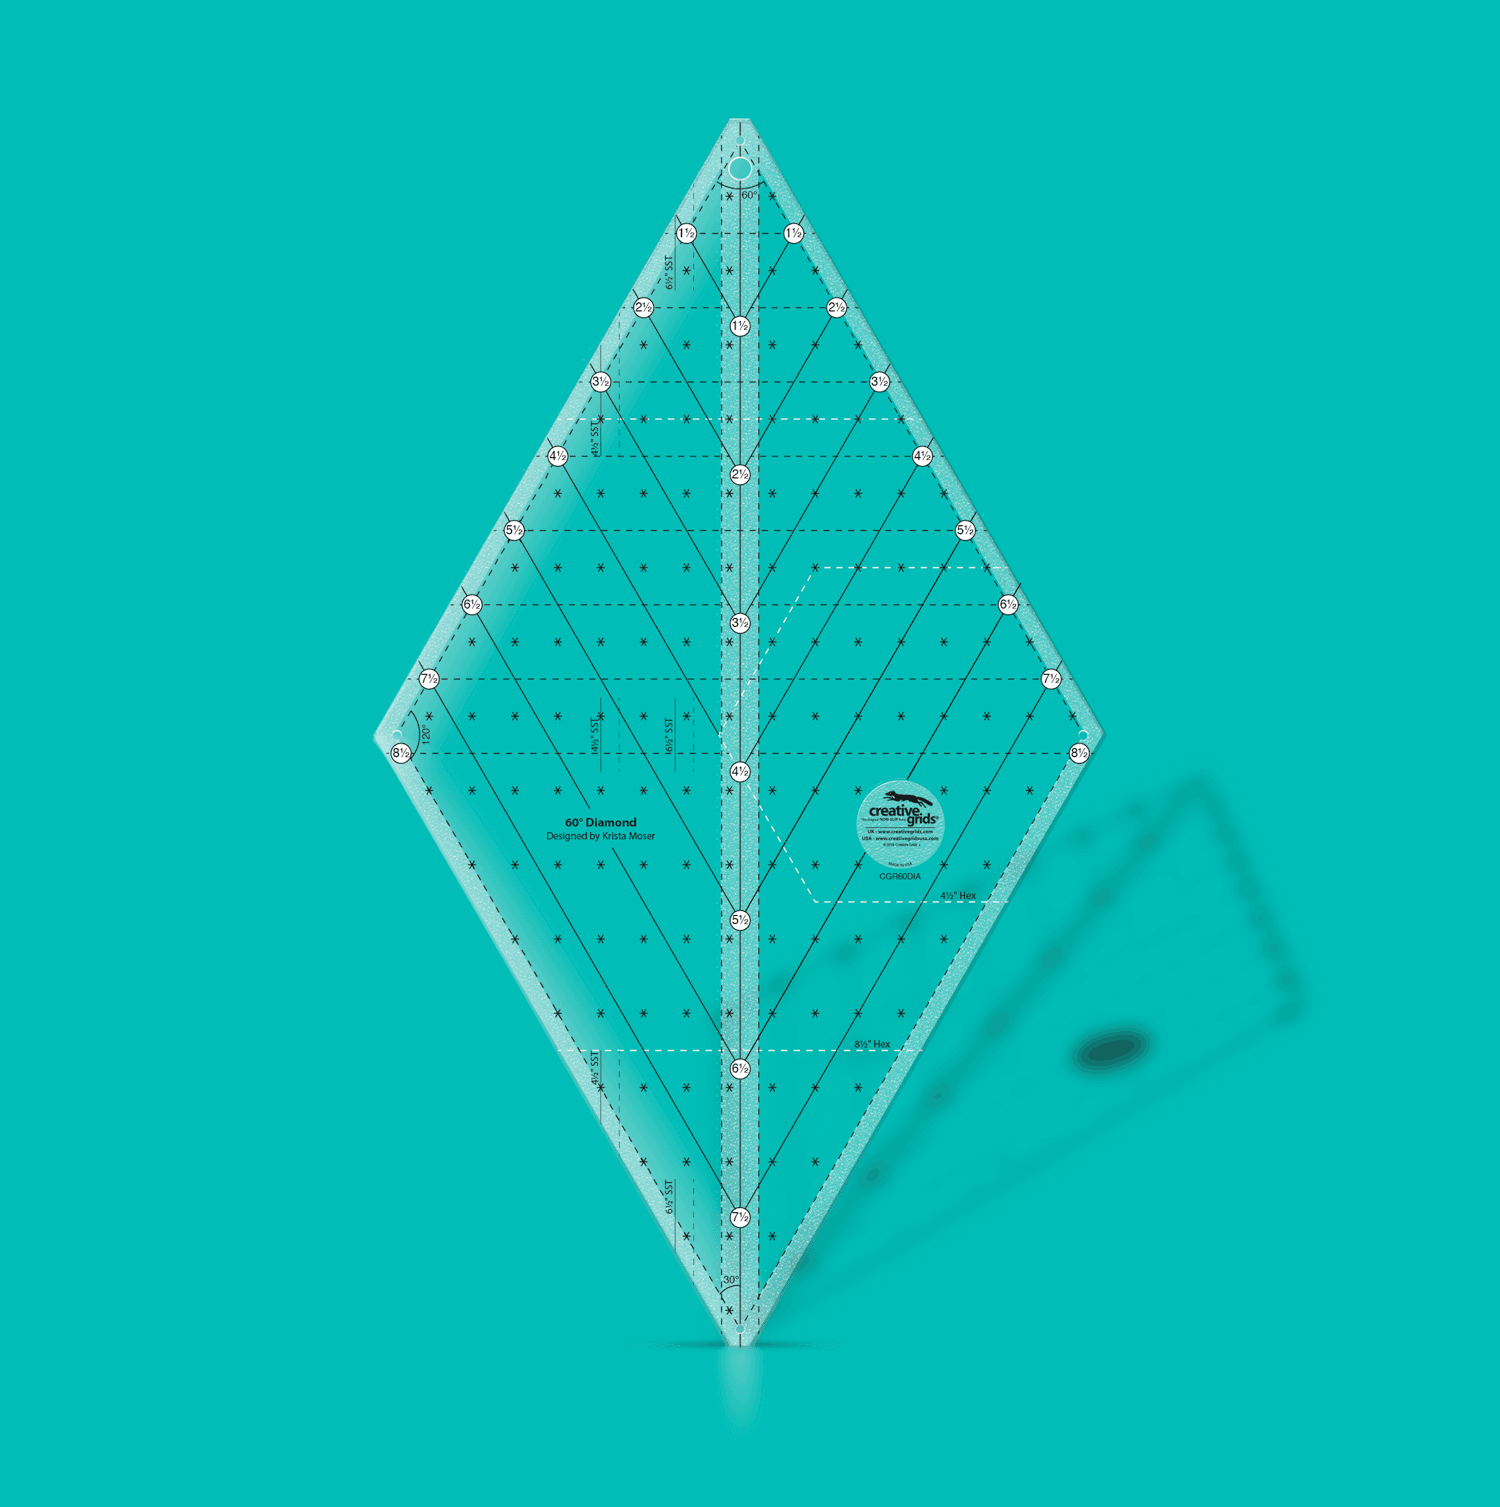 60 Degree Diamond Ruler by Creative Grids